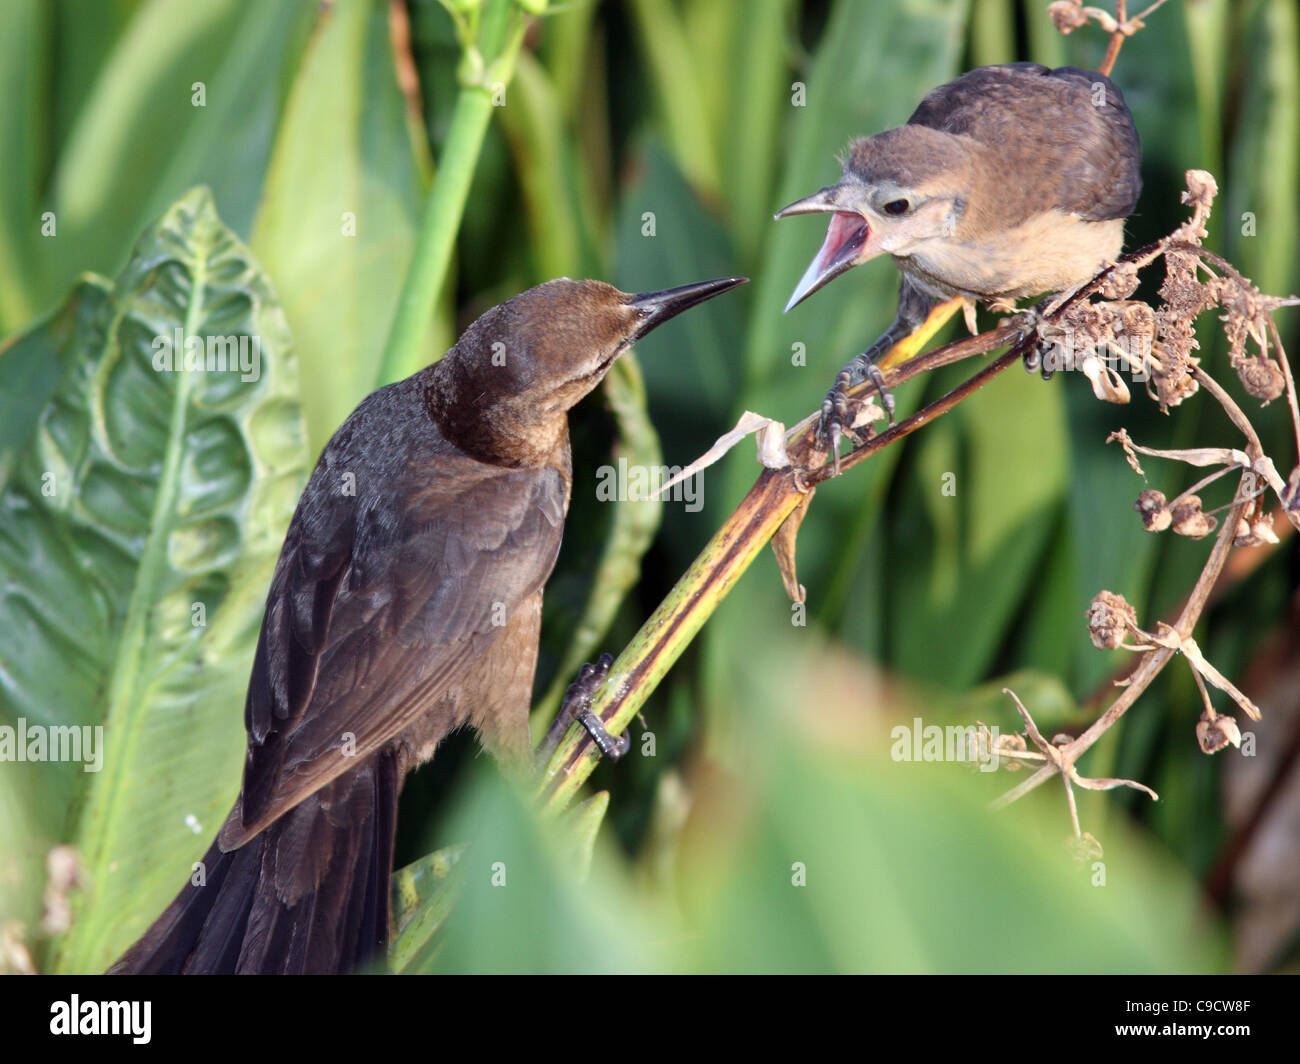 Boat-tailed grackle with chick Stock Photo